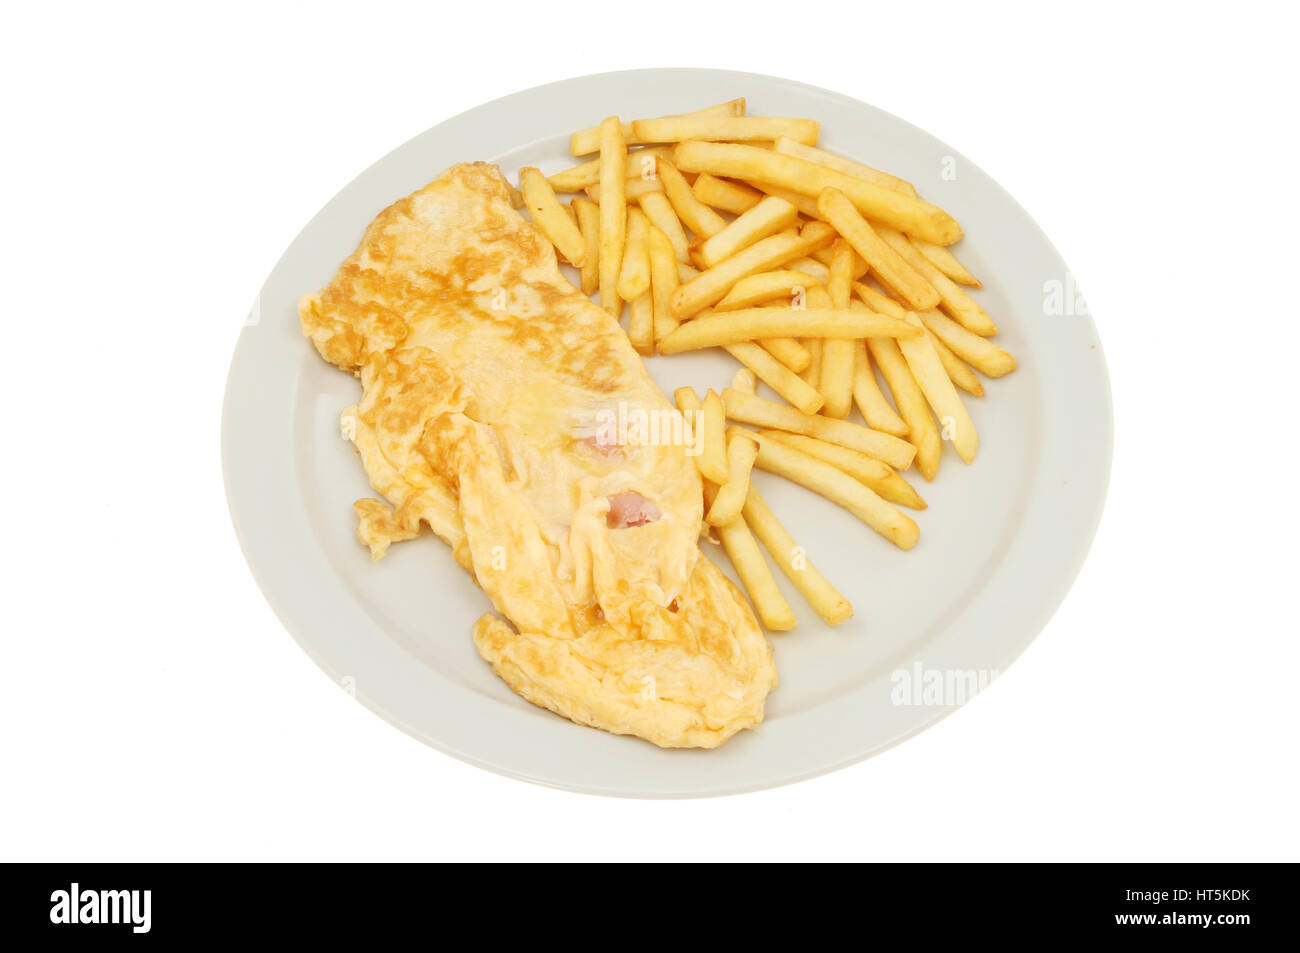 Omelette and French fries on a plate isolated against white Stock Photo